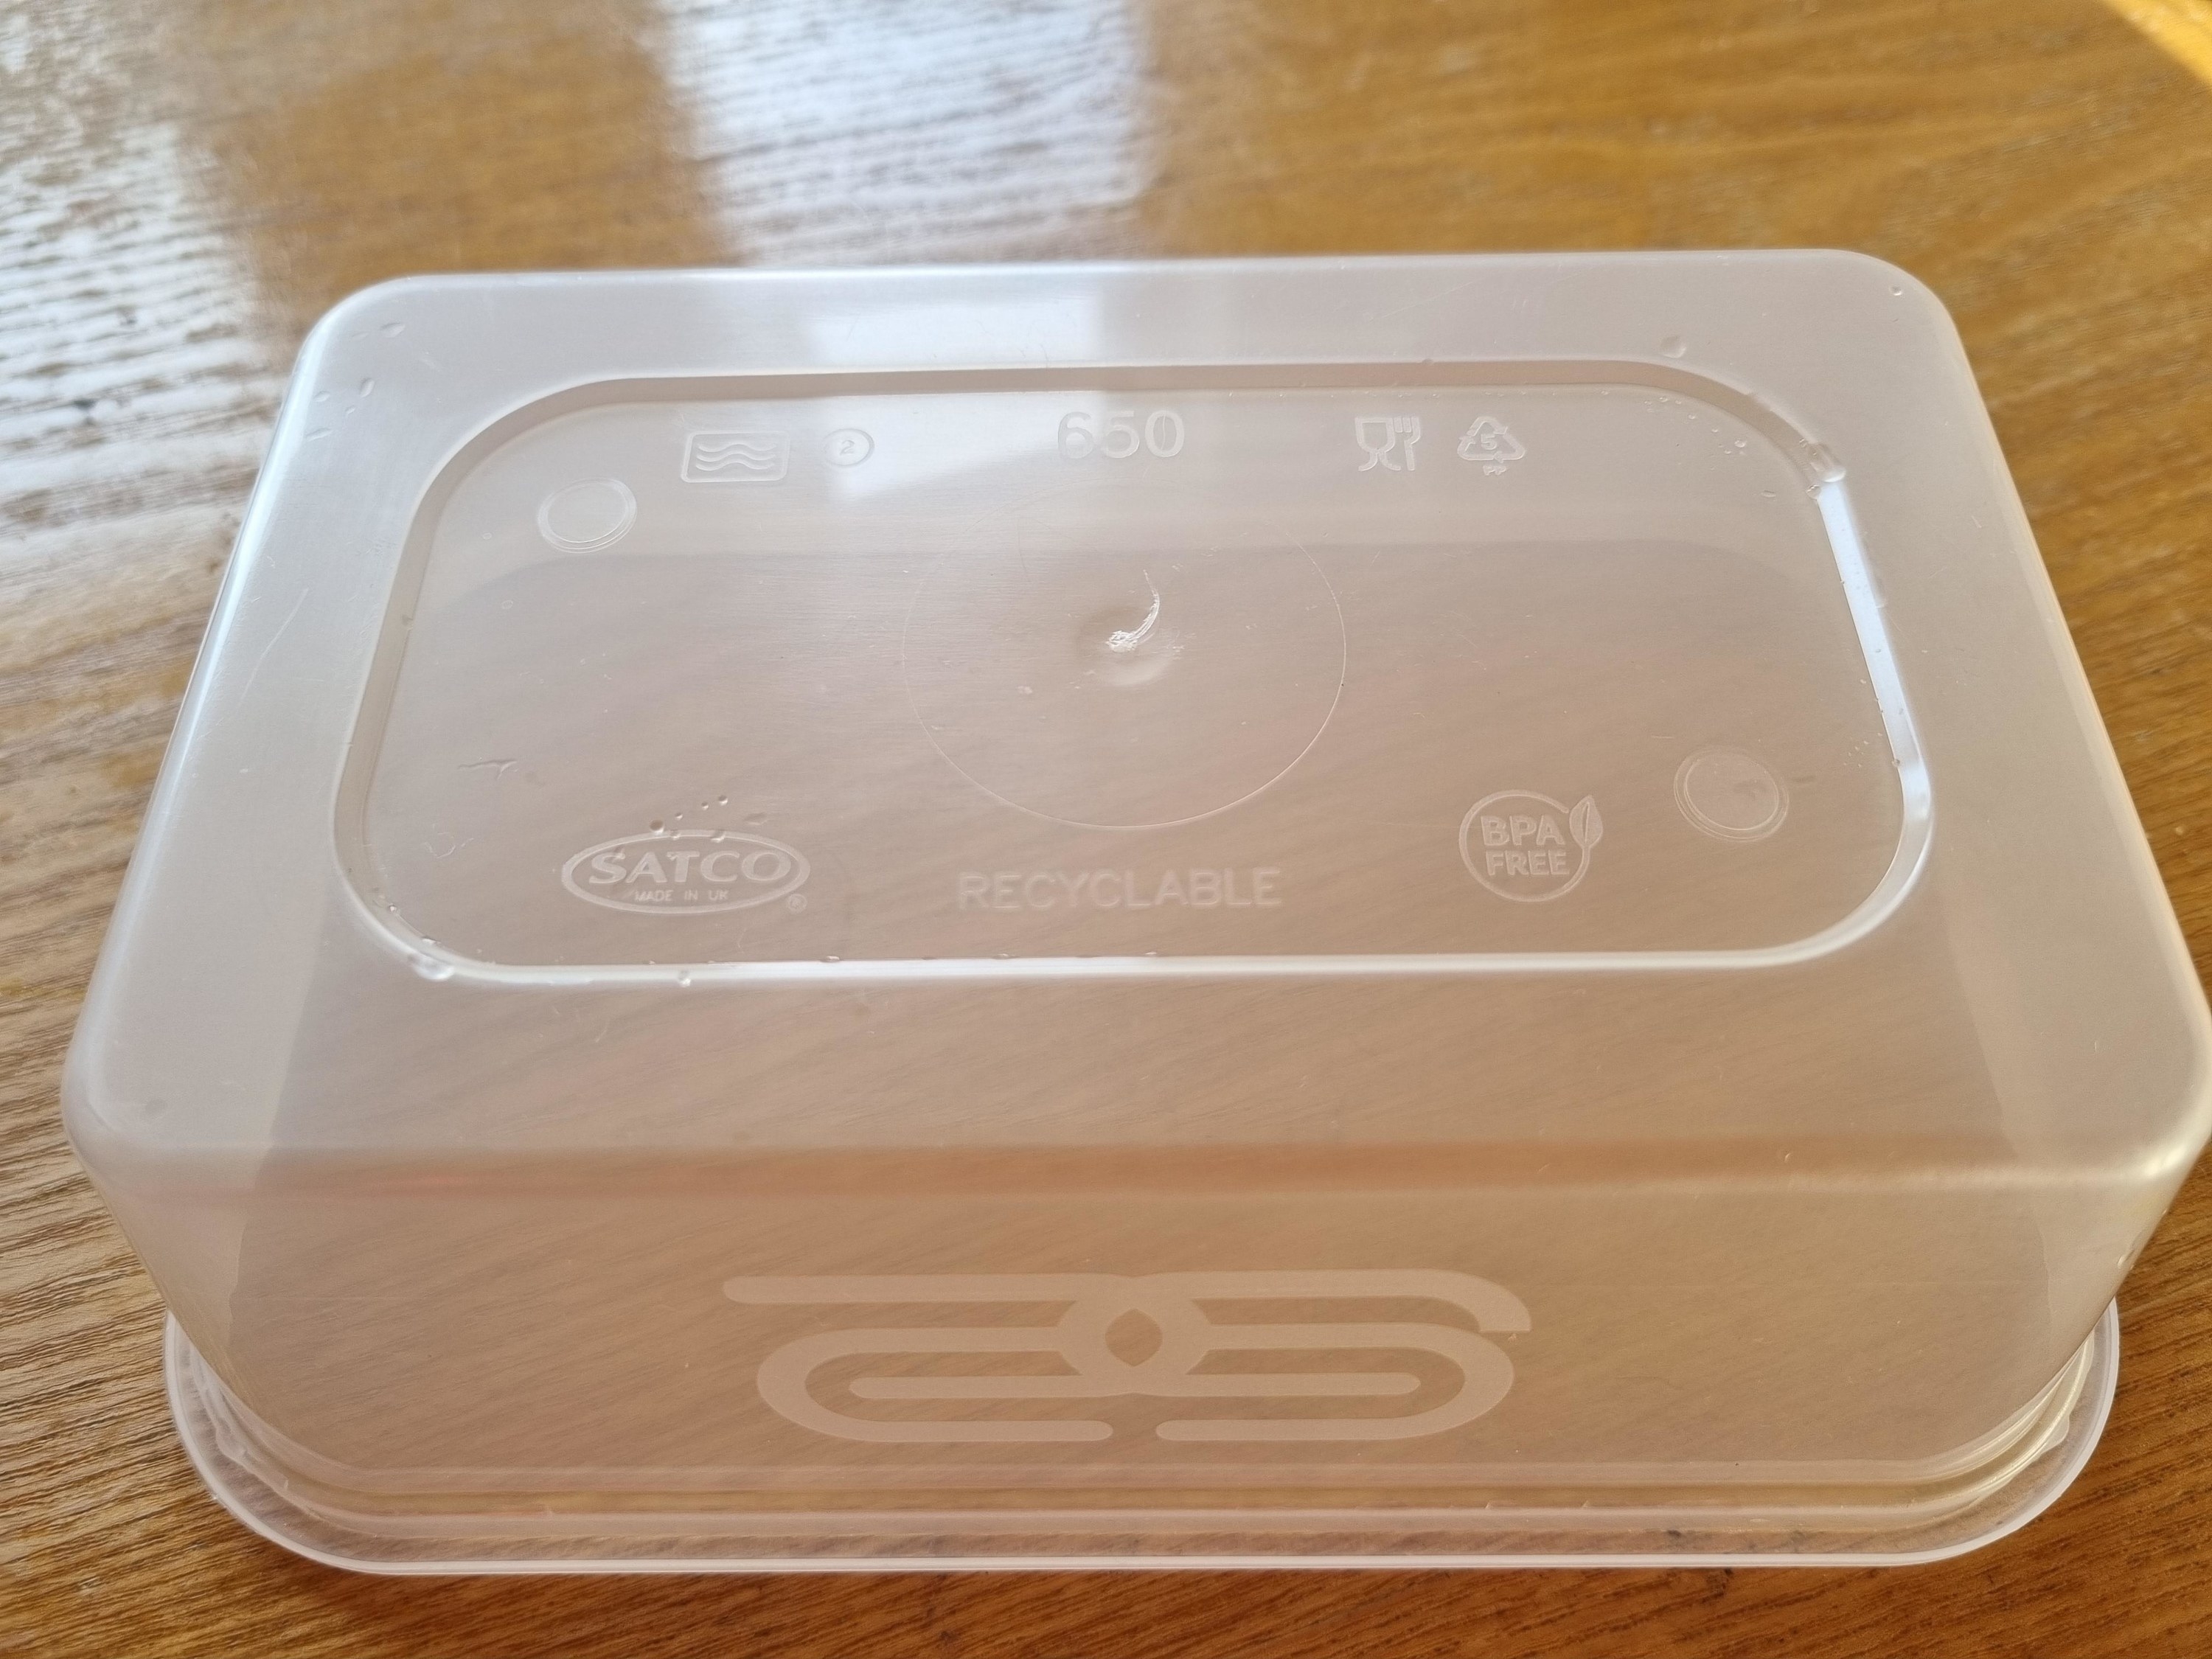 rectangular plastic box for chinese takeaway, turned upside down